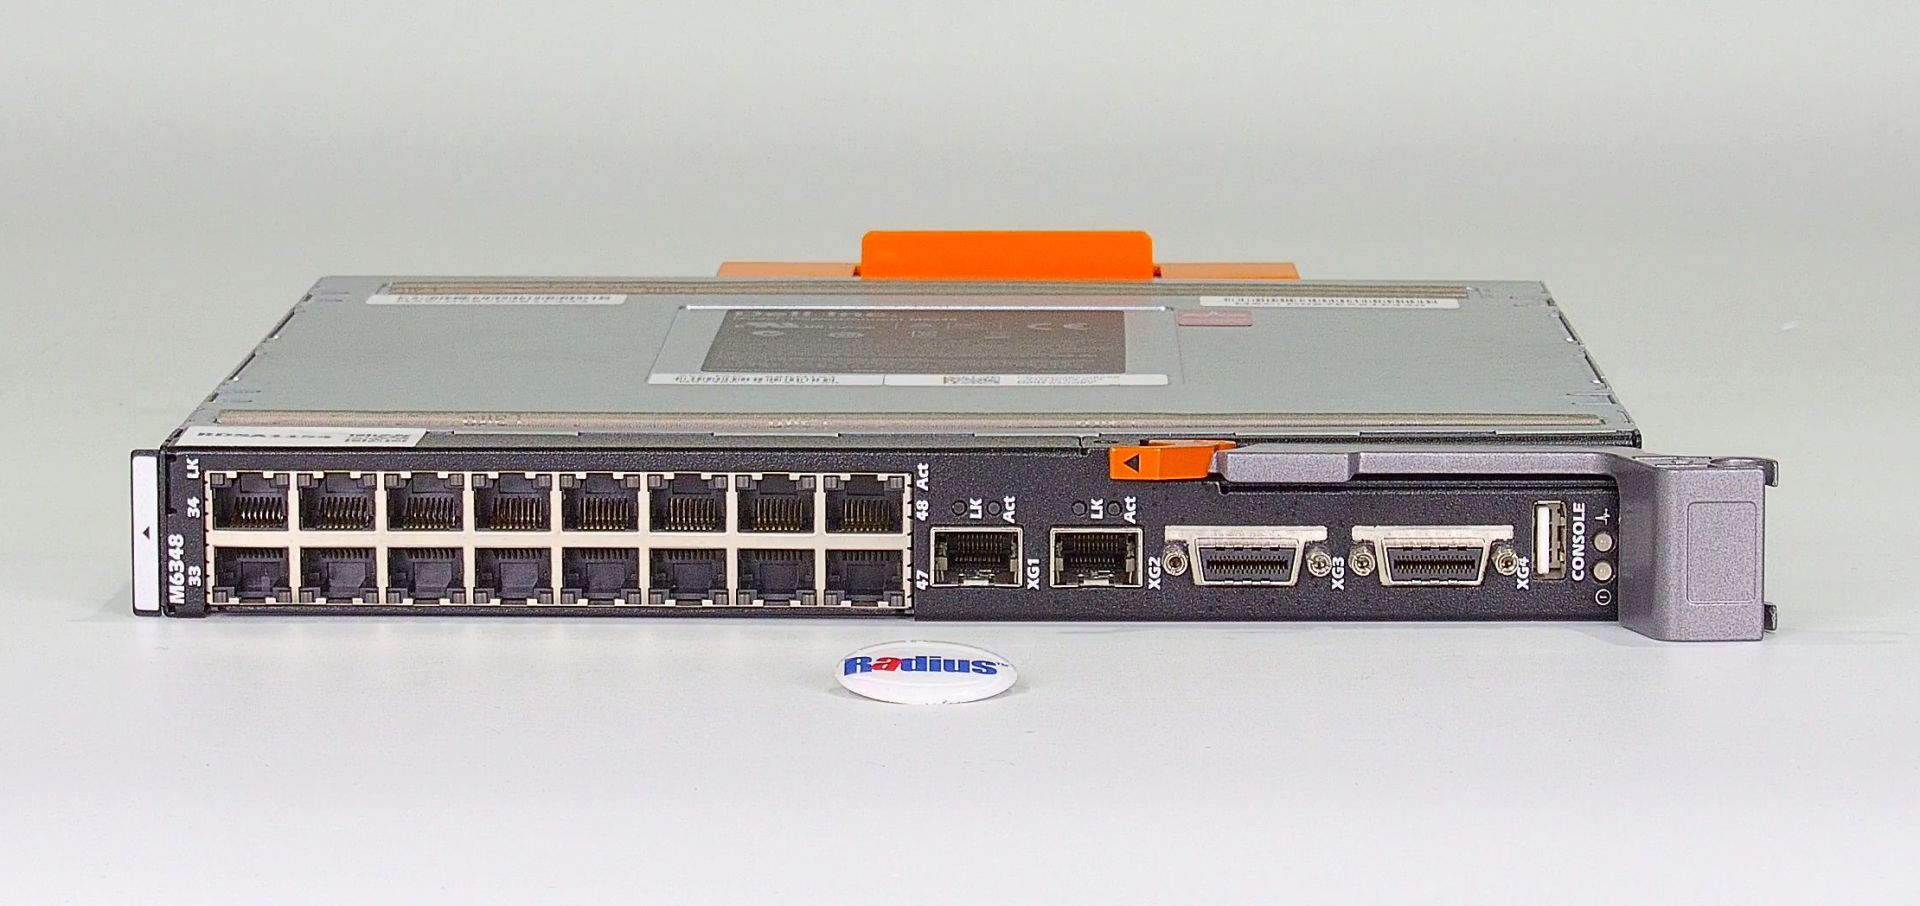 Dell PowerConnect M6348 Blade Switch